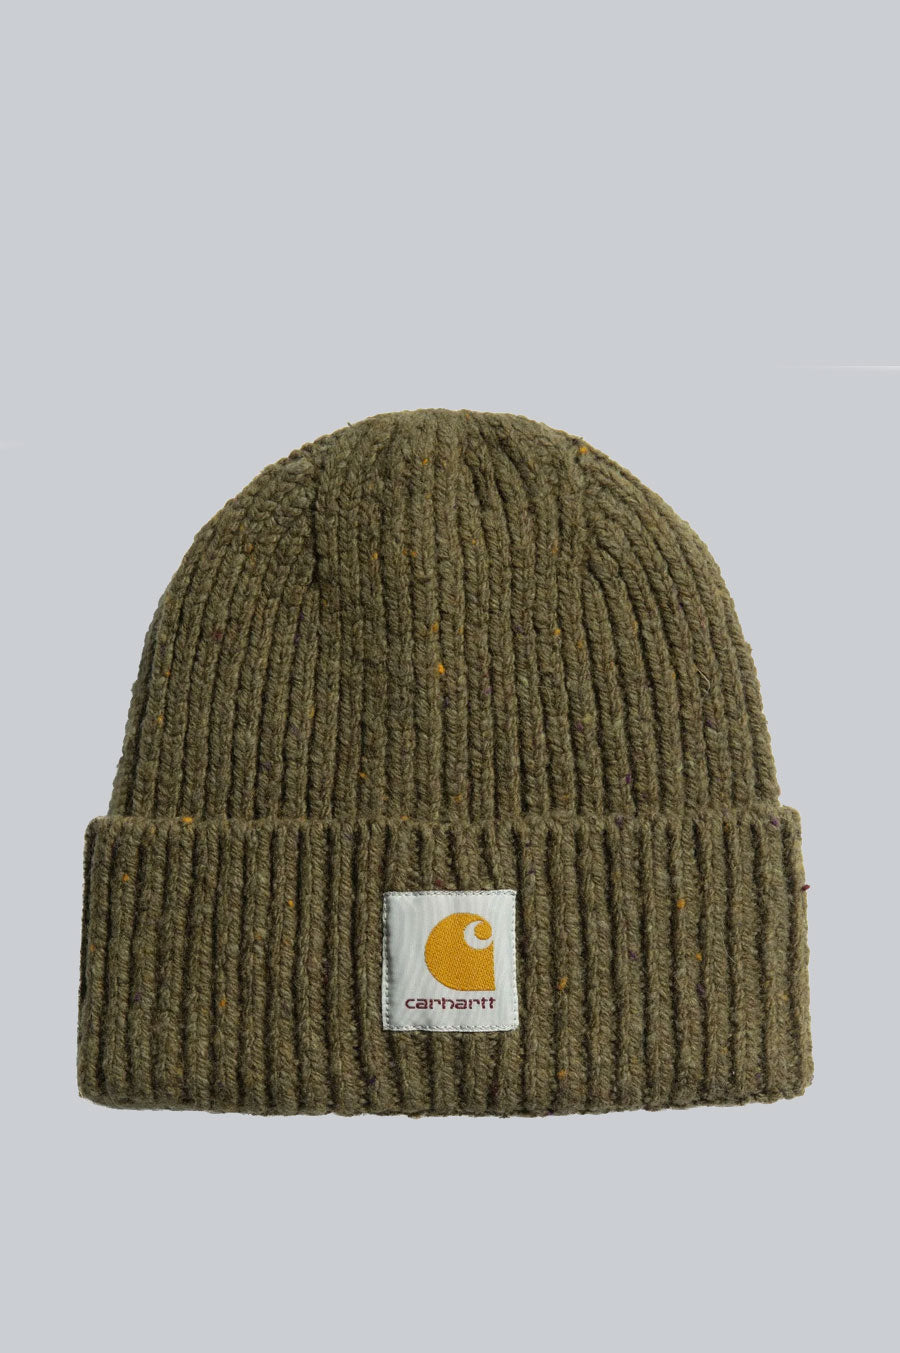 CARHARTT WIP ANGLISTIC BEANIE SPECKLED HIGHLAND